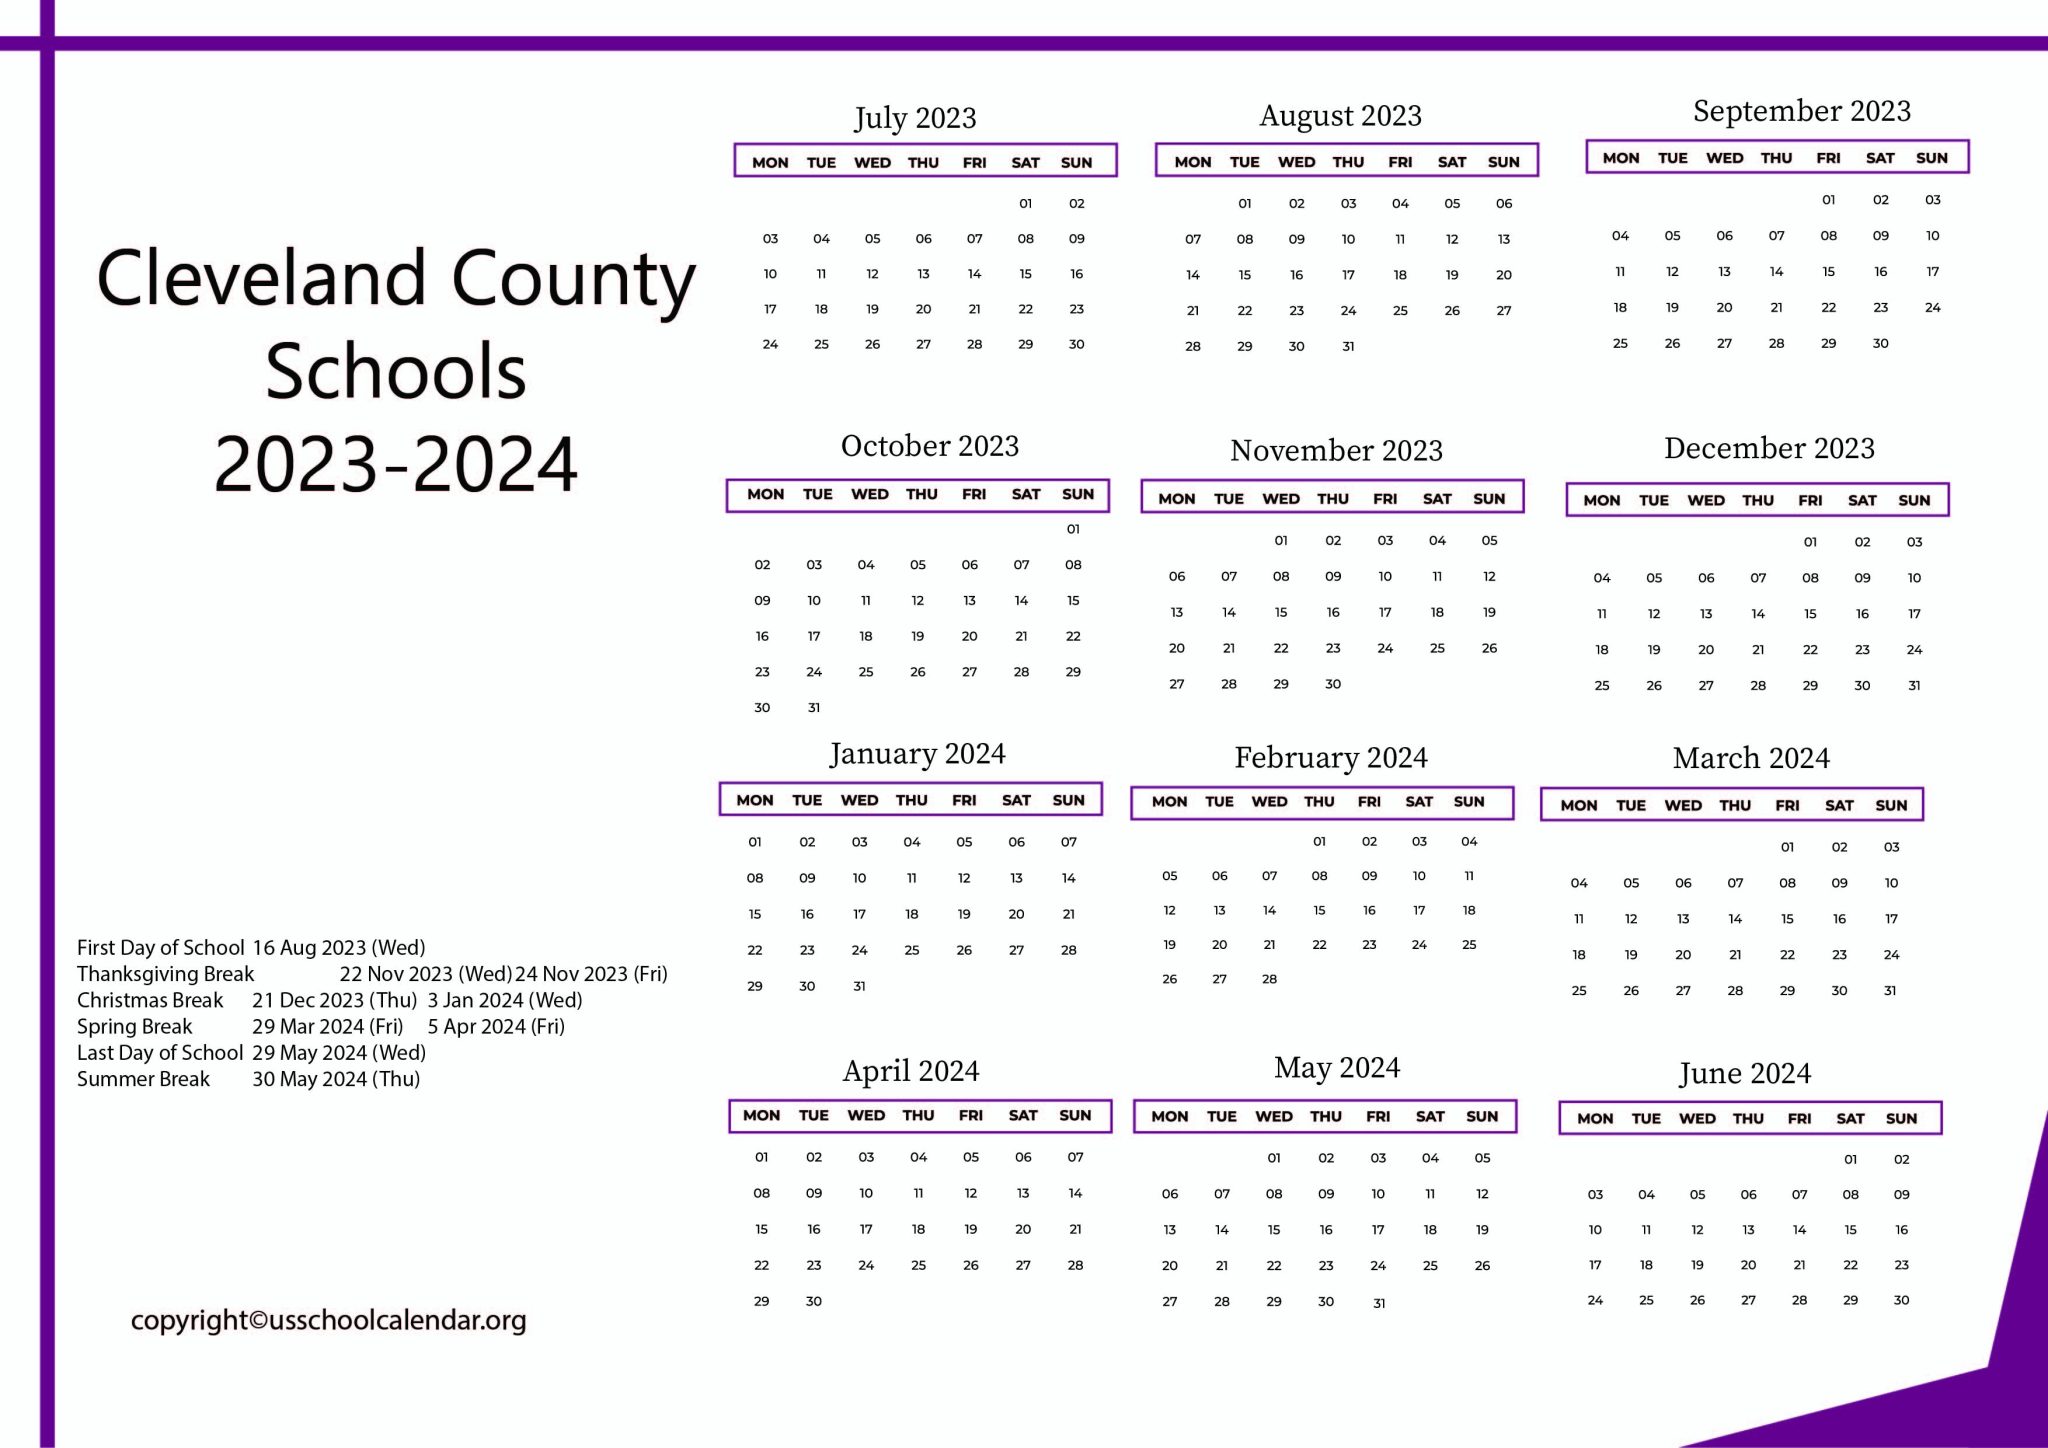 cleveland-county-schools-calendar-with-holidays-2022-2023